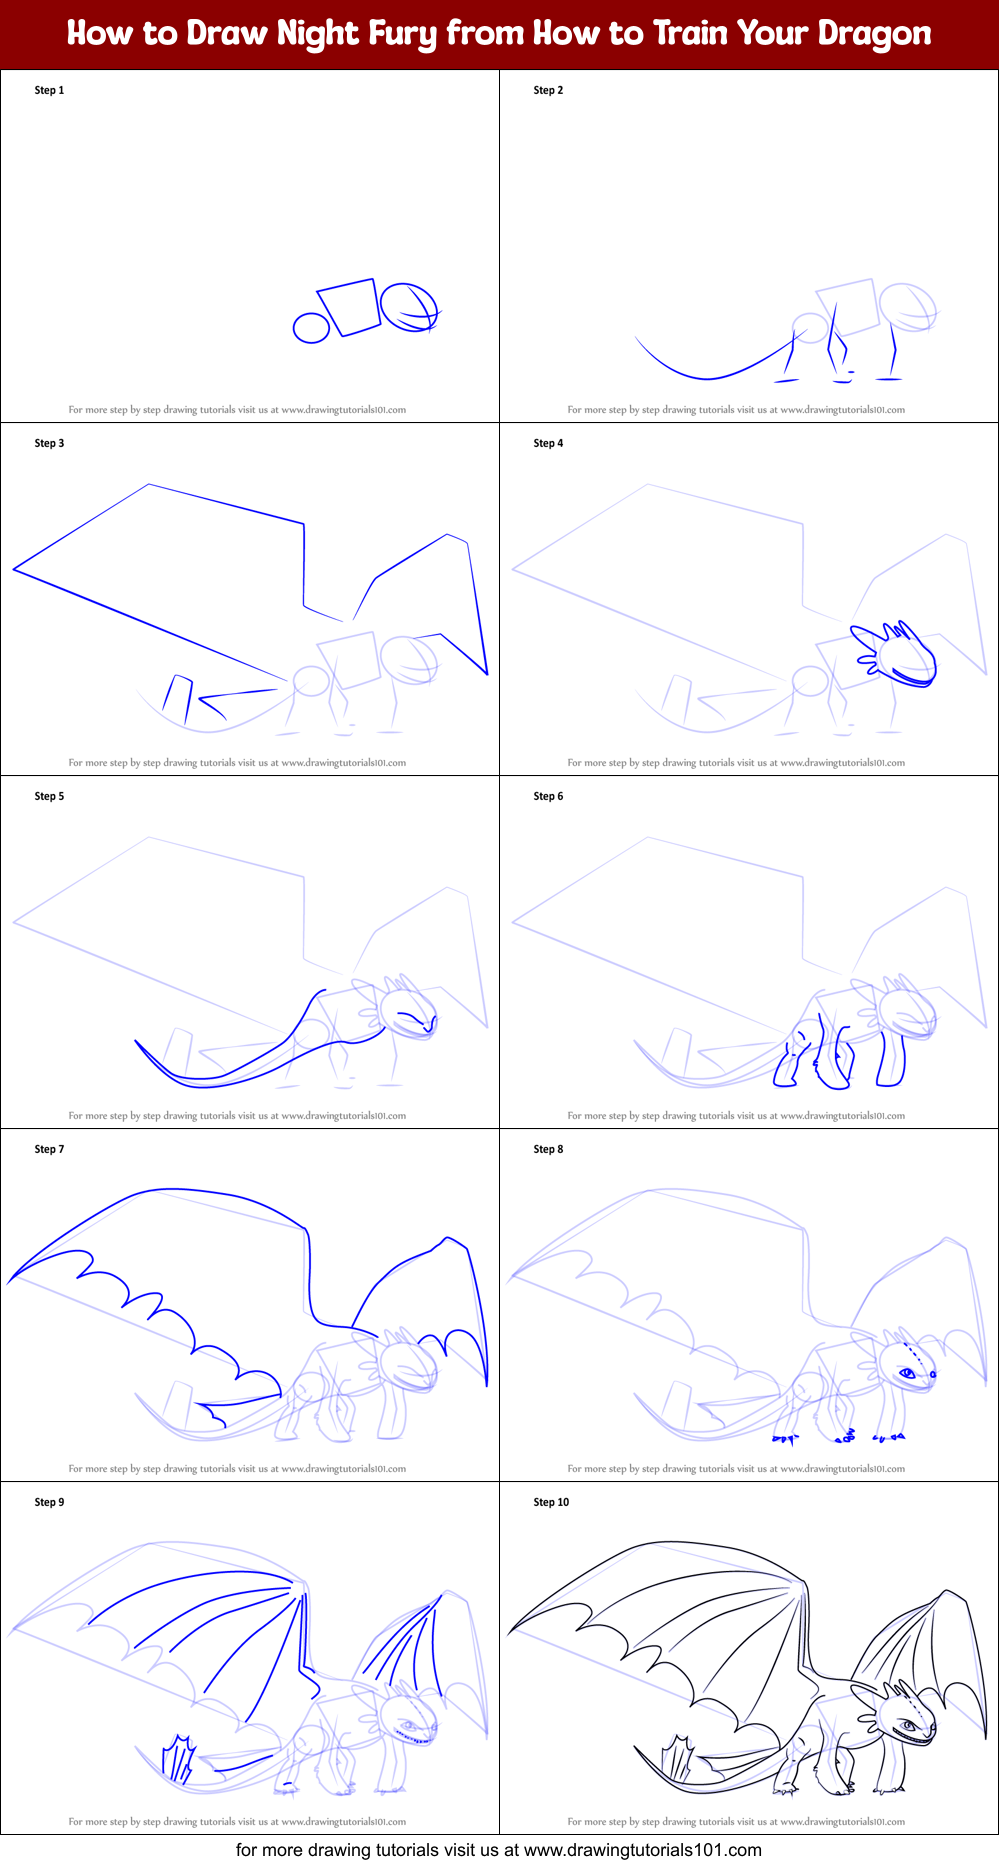 How to Draw Night Fury from How to Train Your Dragon printable step by